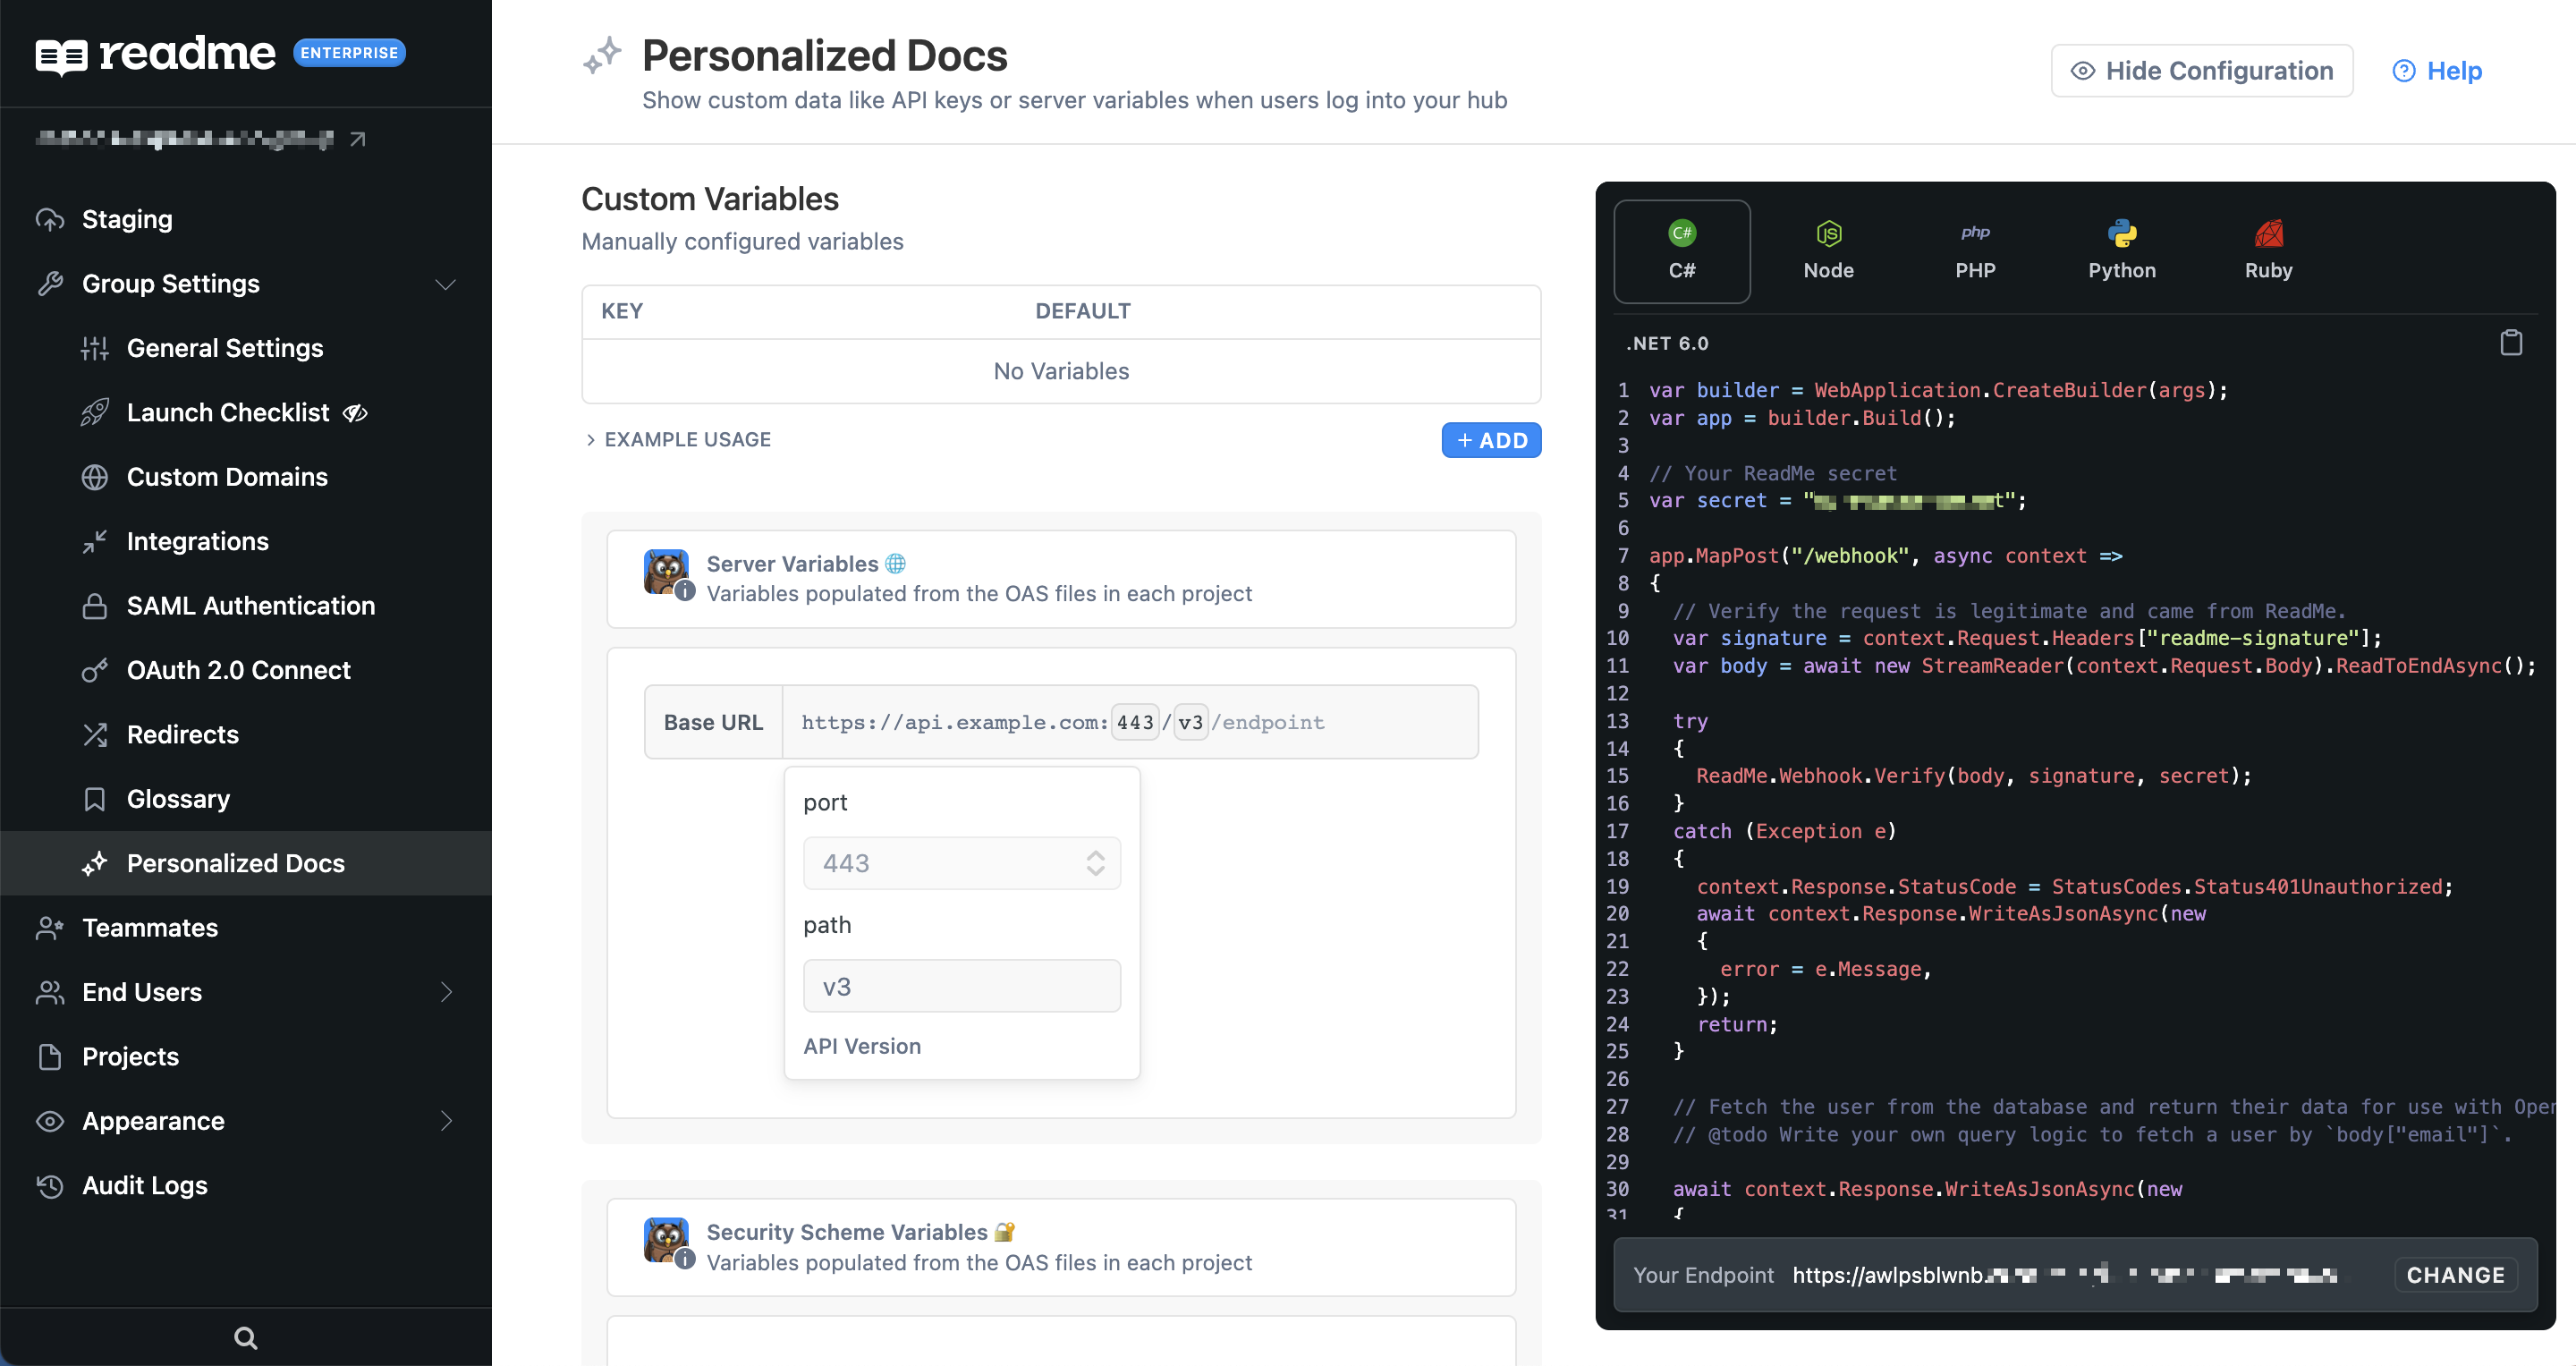 In the view above, the Personalized Docs Webhook has already been configured and deployed.